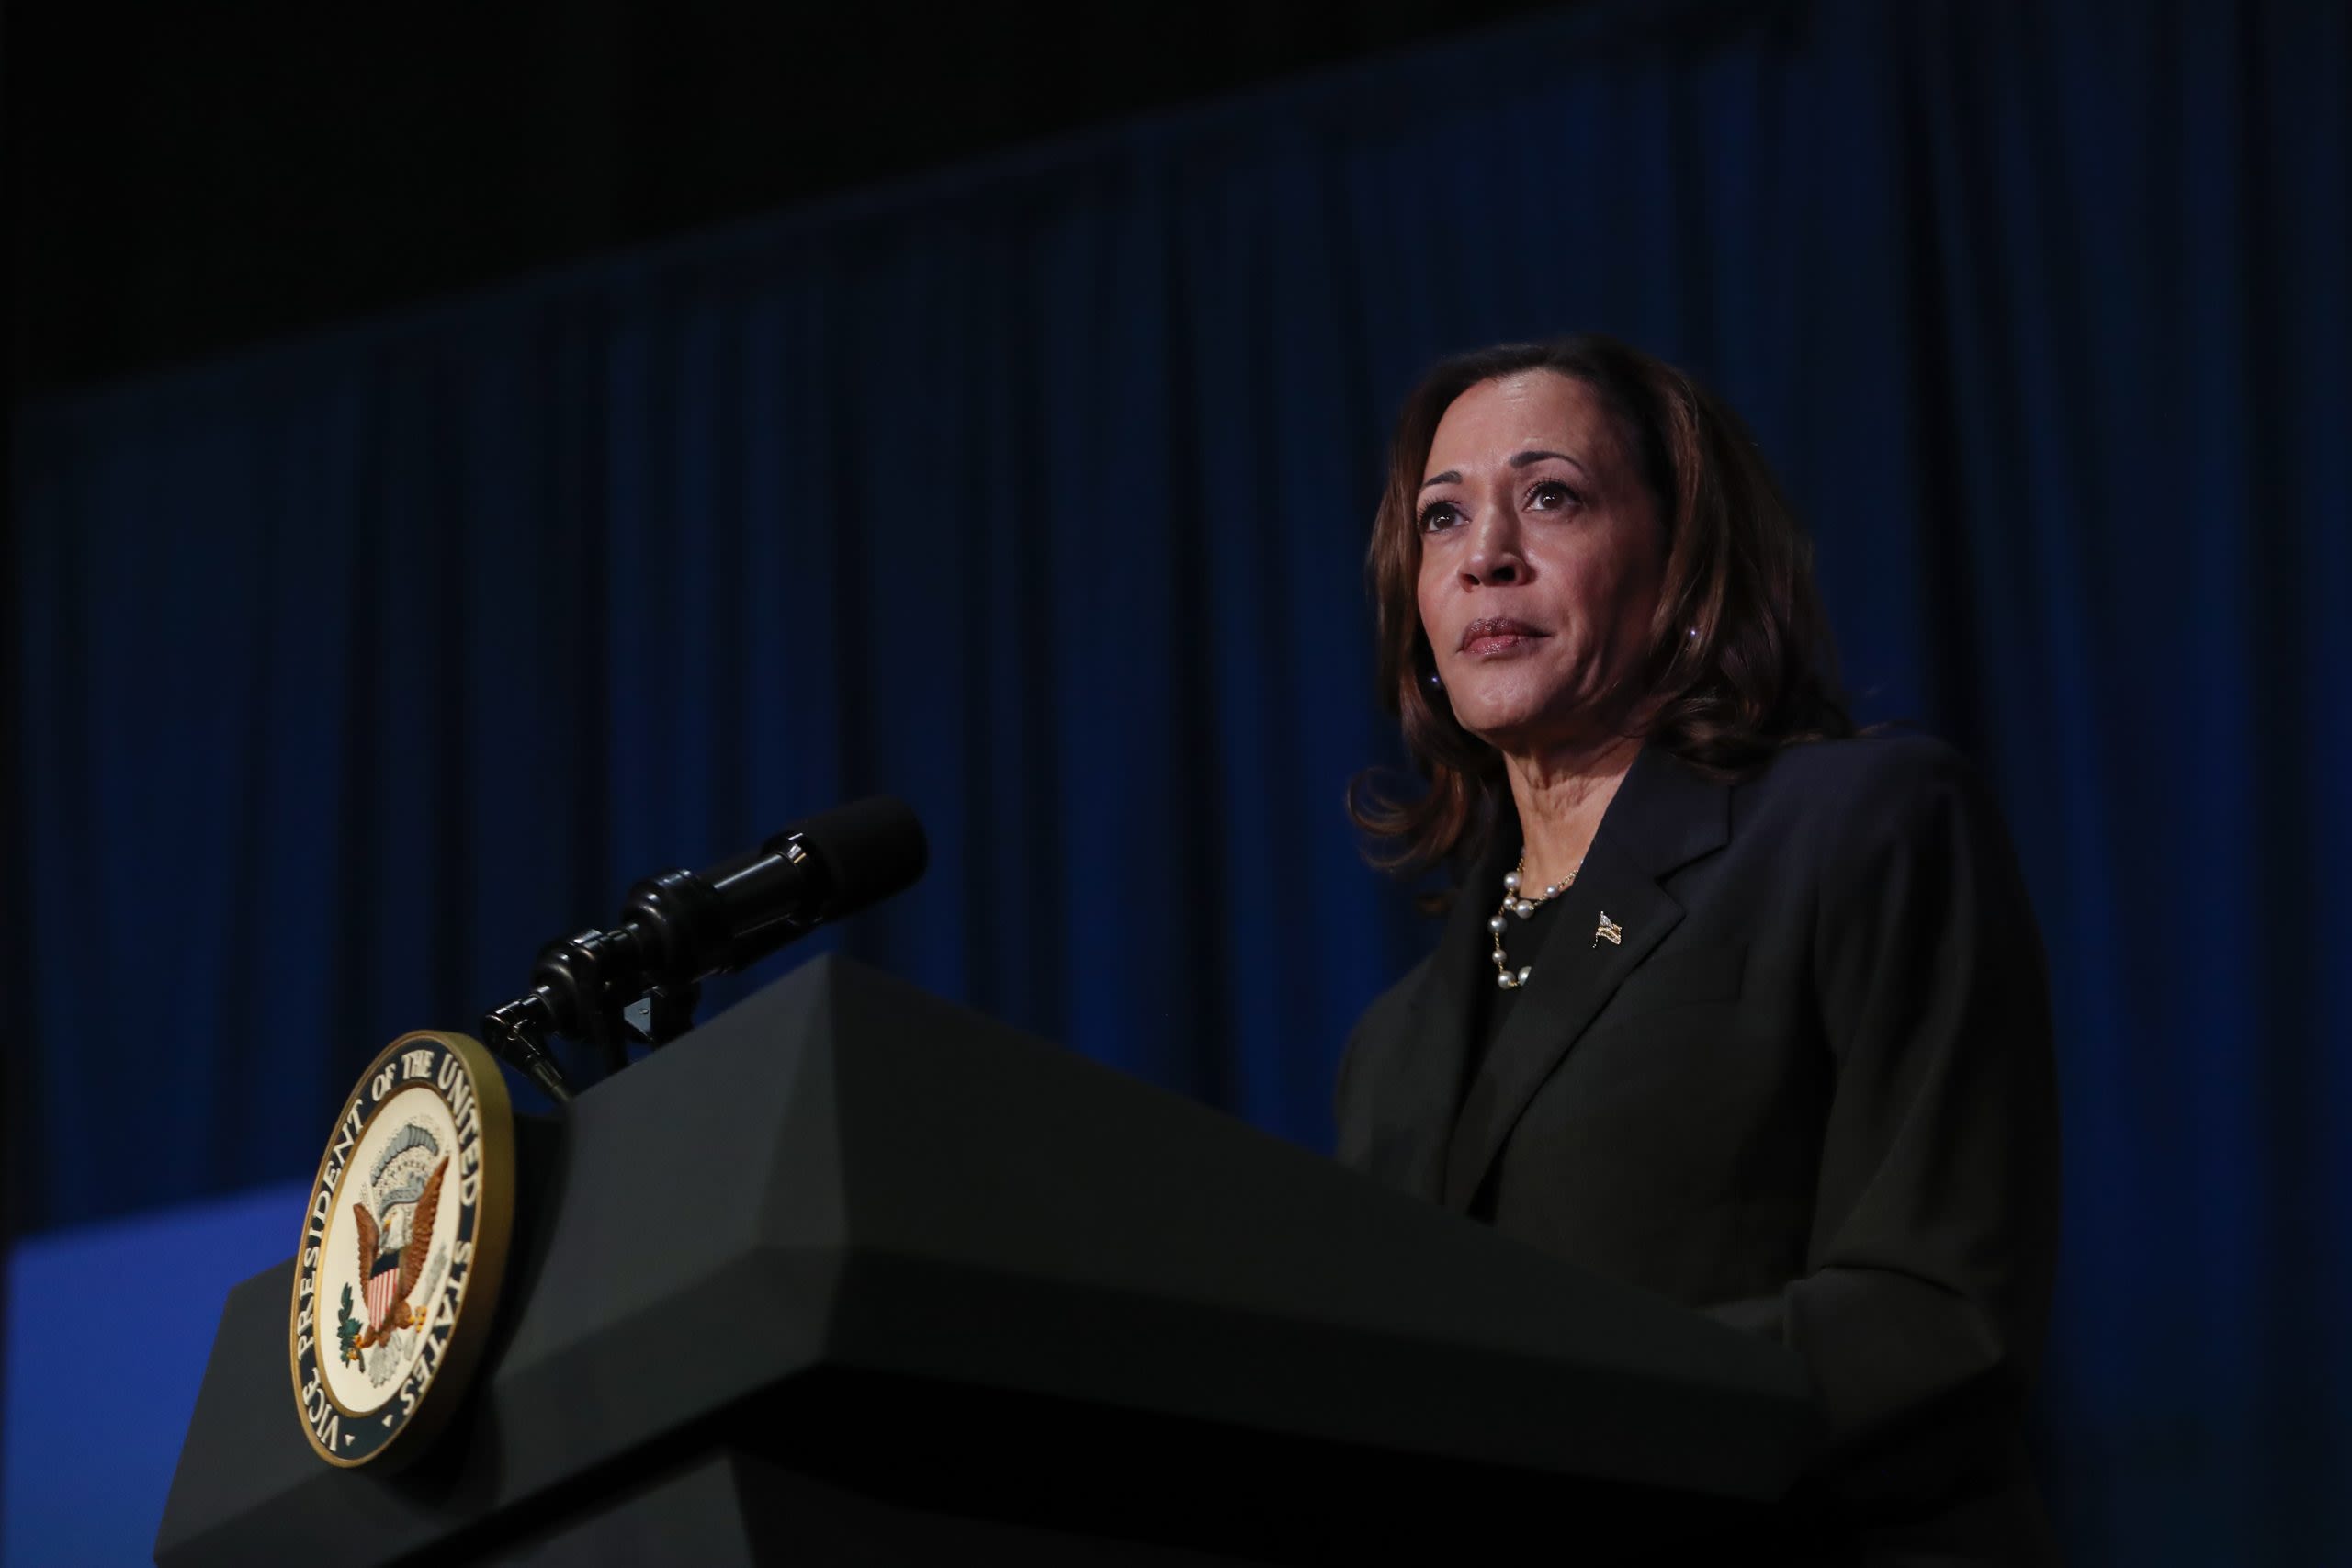 Where Does Kamala Harris Stand on Key Issues Affecting Black Voters?